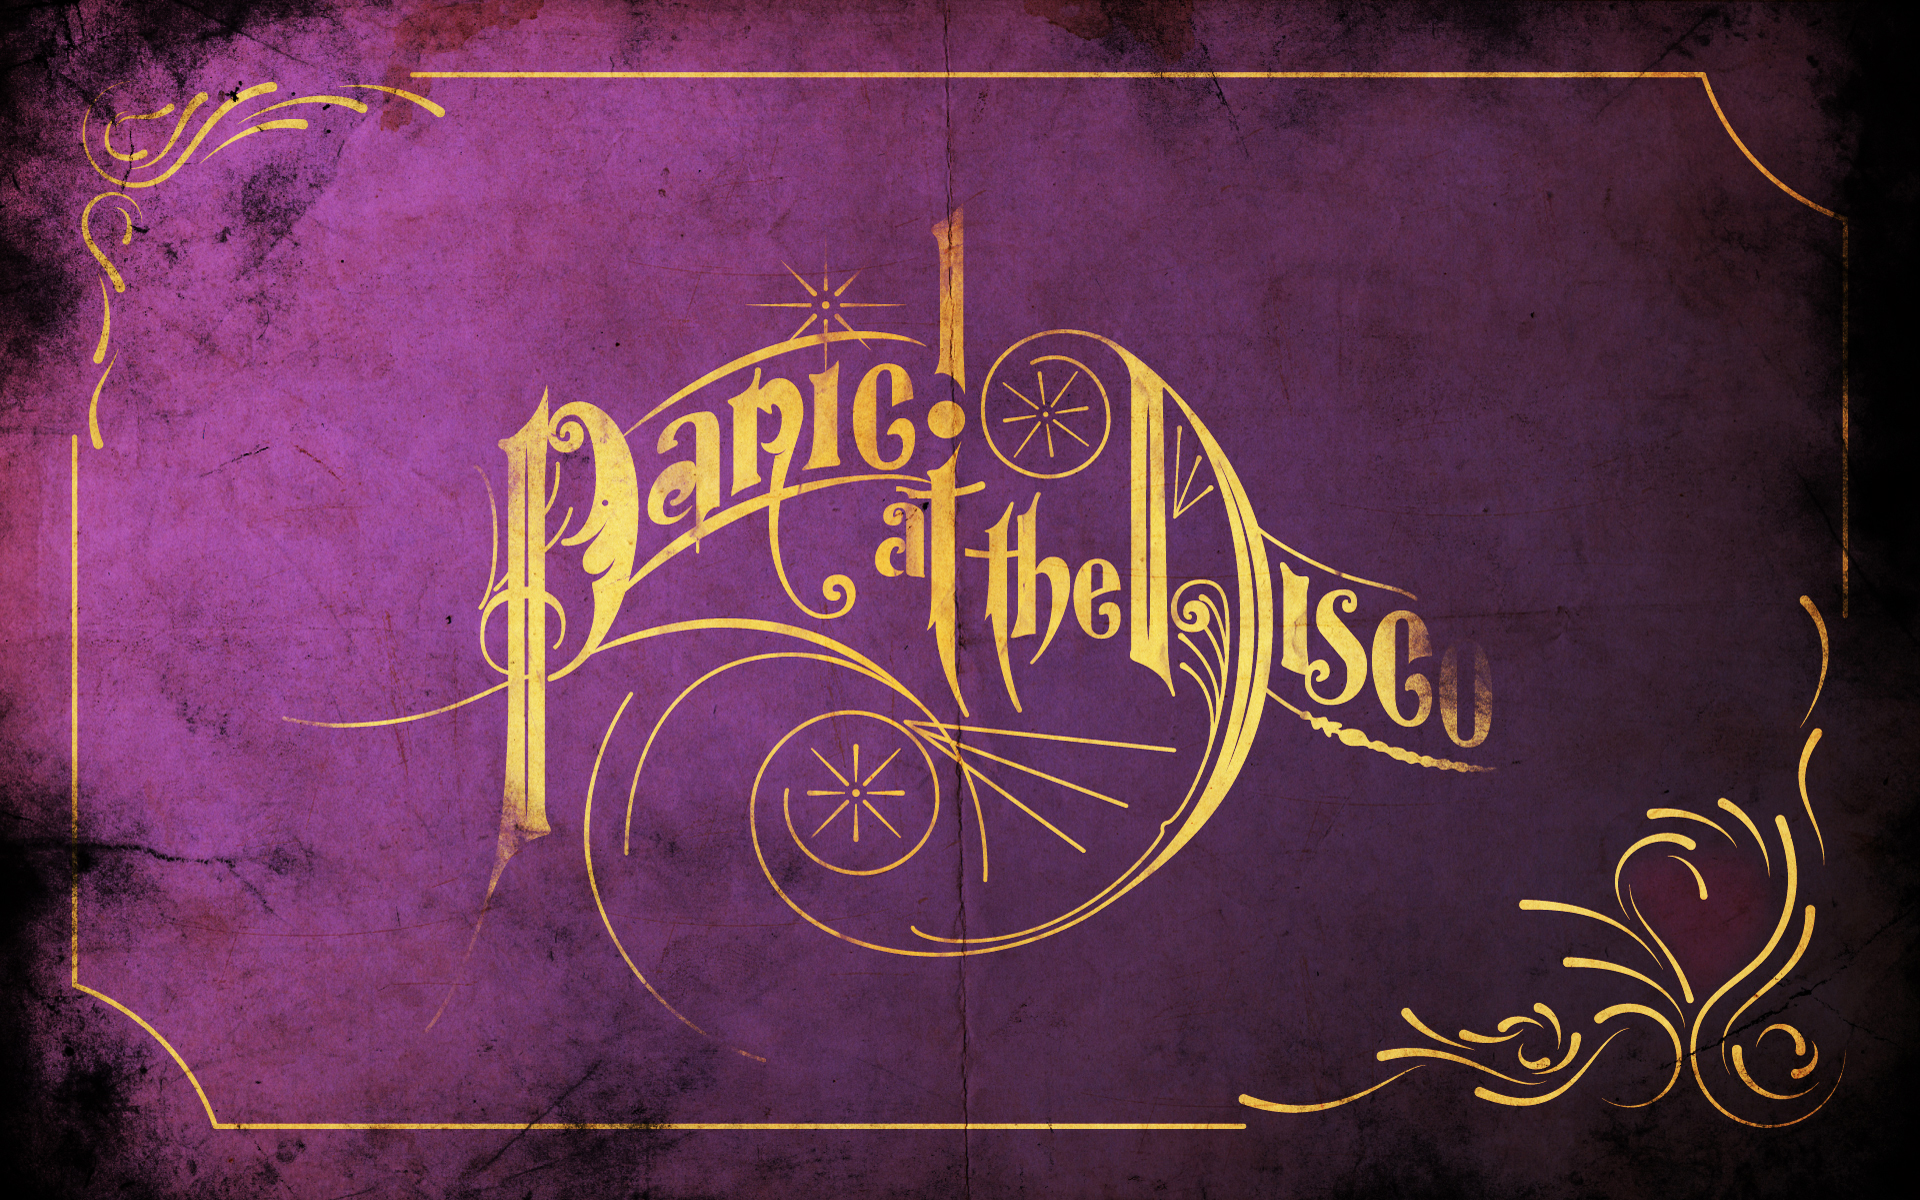 Panic at the disco wallpapers